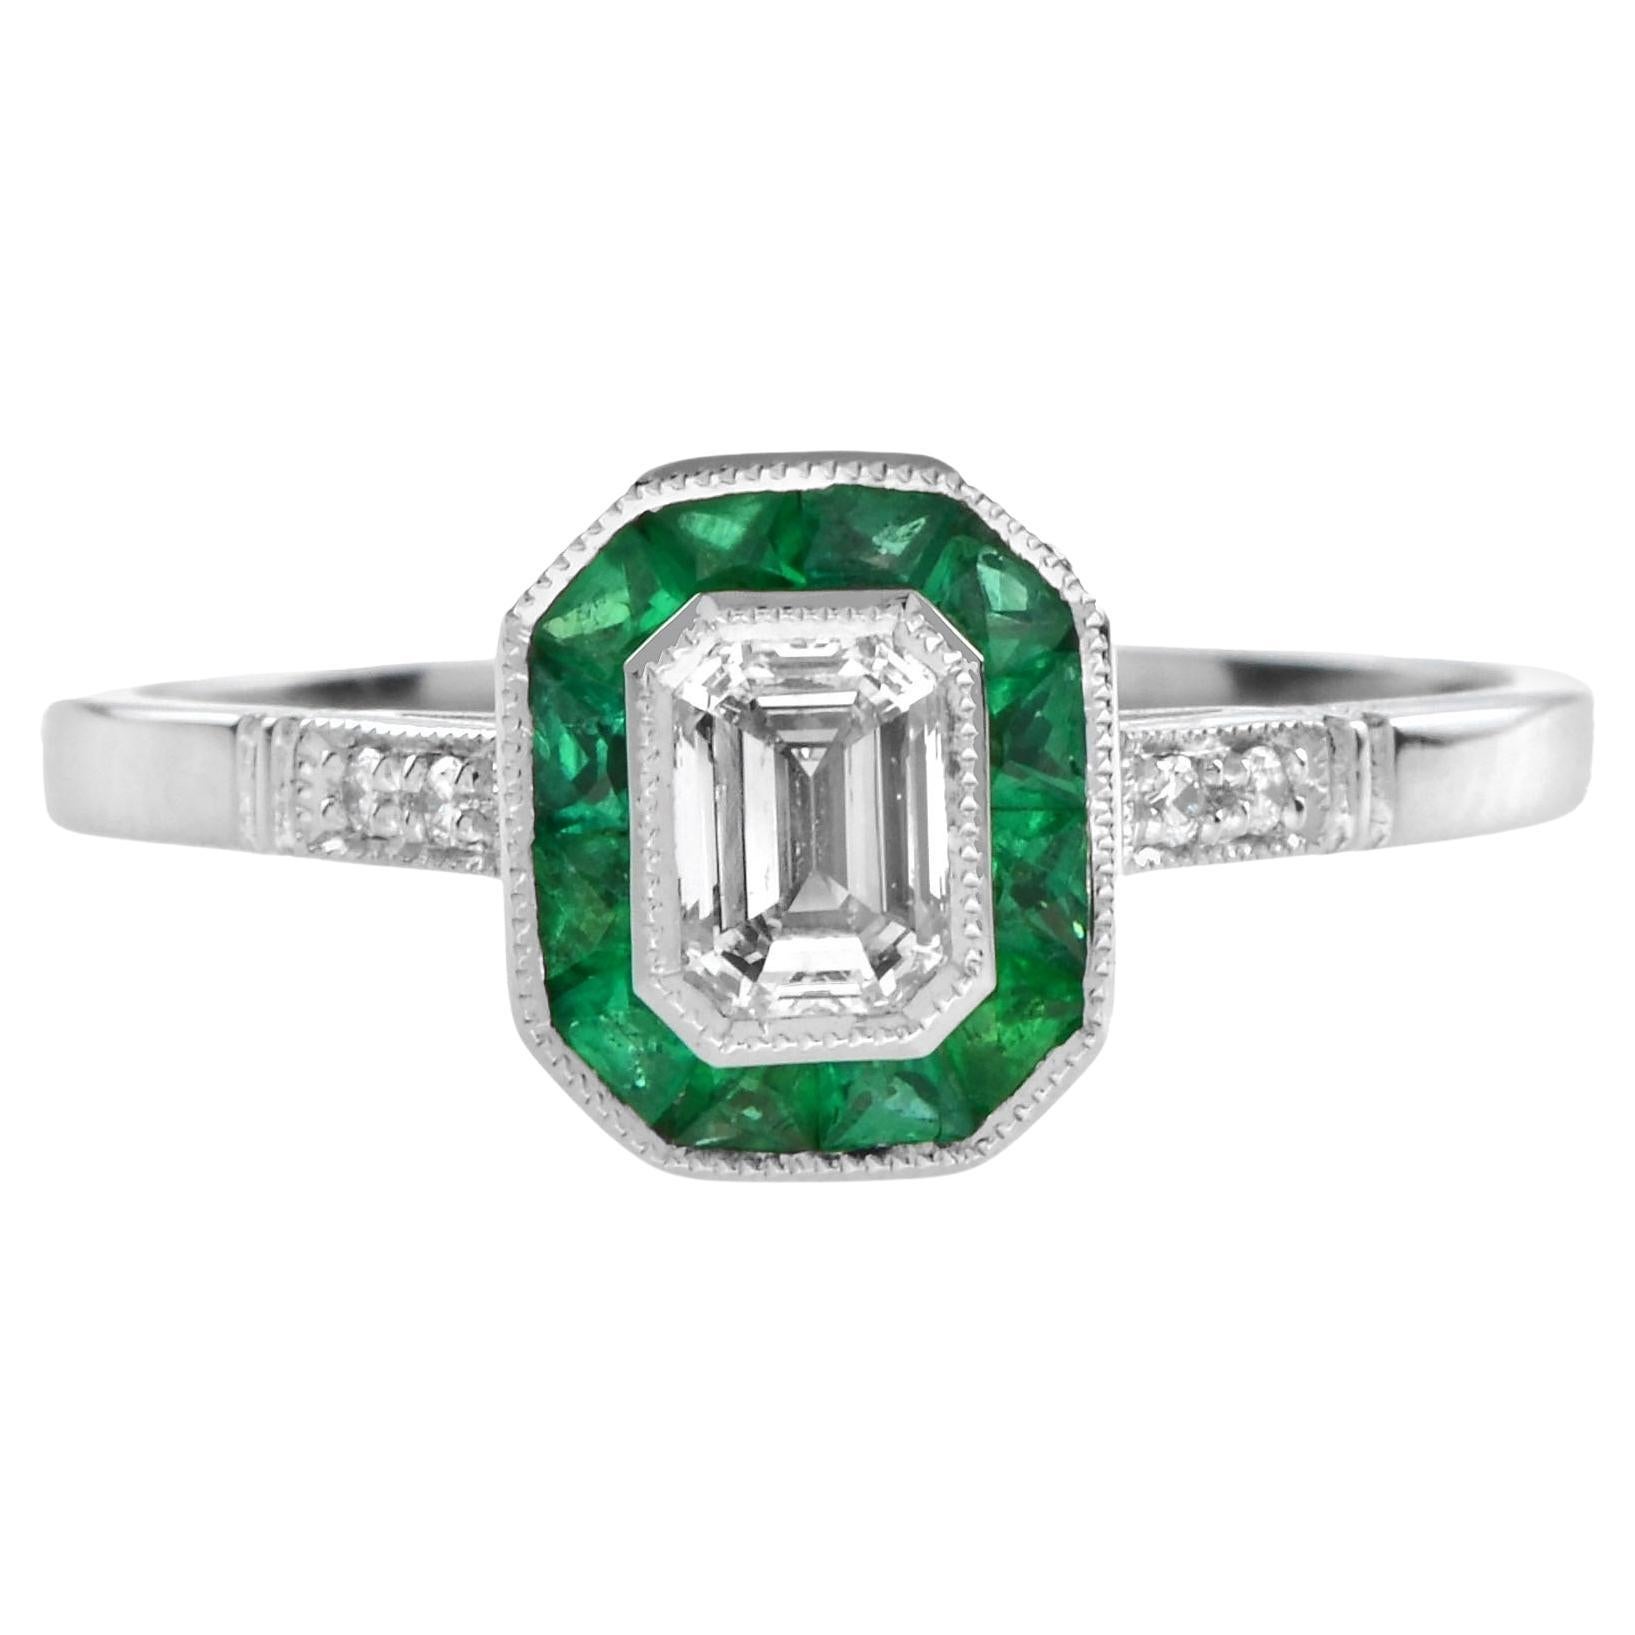 Emerald Cut Diamond and Emerald Art Deco Style Engagement Ring in 18K White Gold